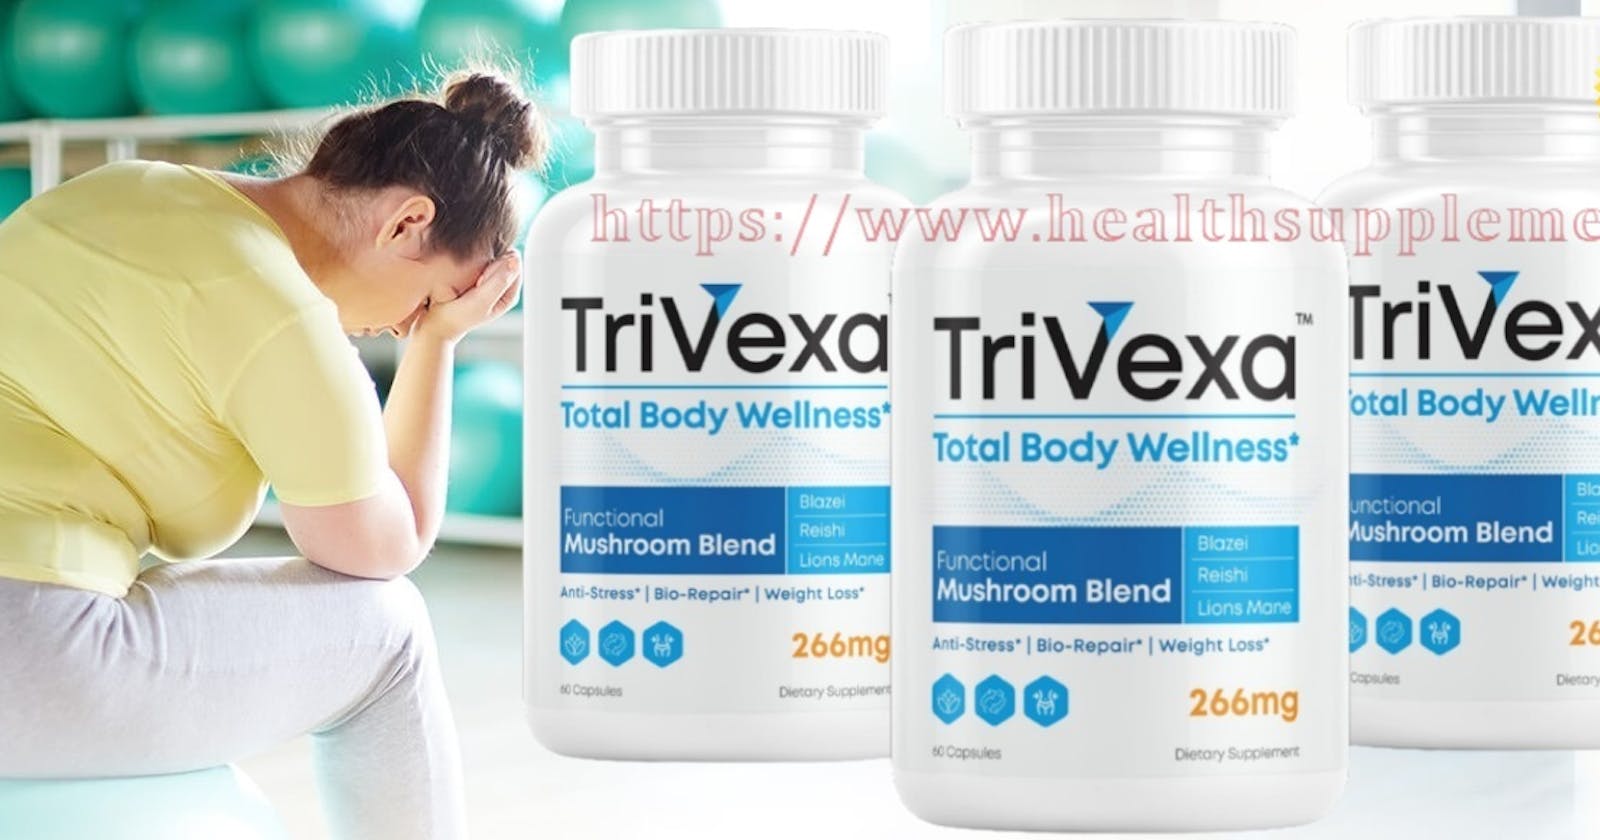 TriVexa [Total Body Wellness Supplement] Supports Healthy Weight Loss, Stress Reduction And Bio Repair(Work Or Hoax)